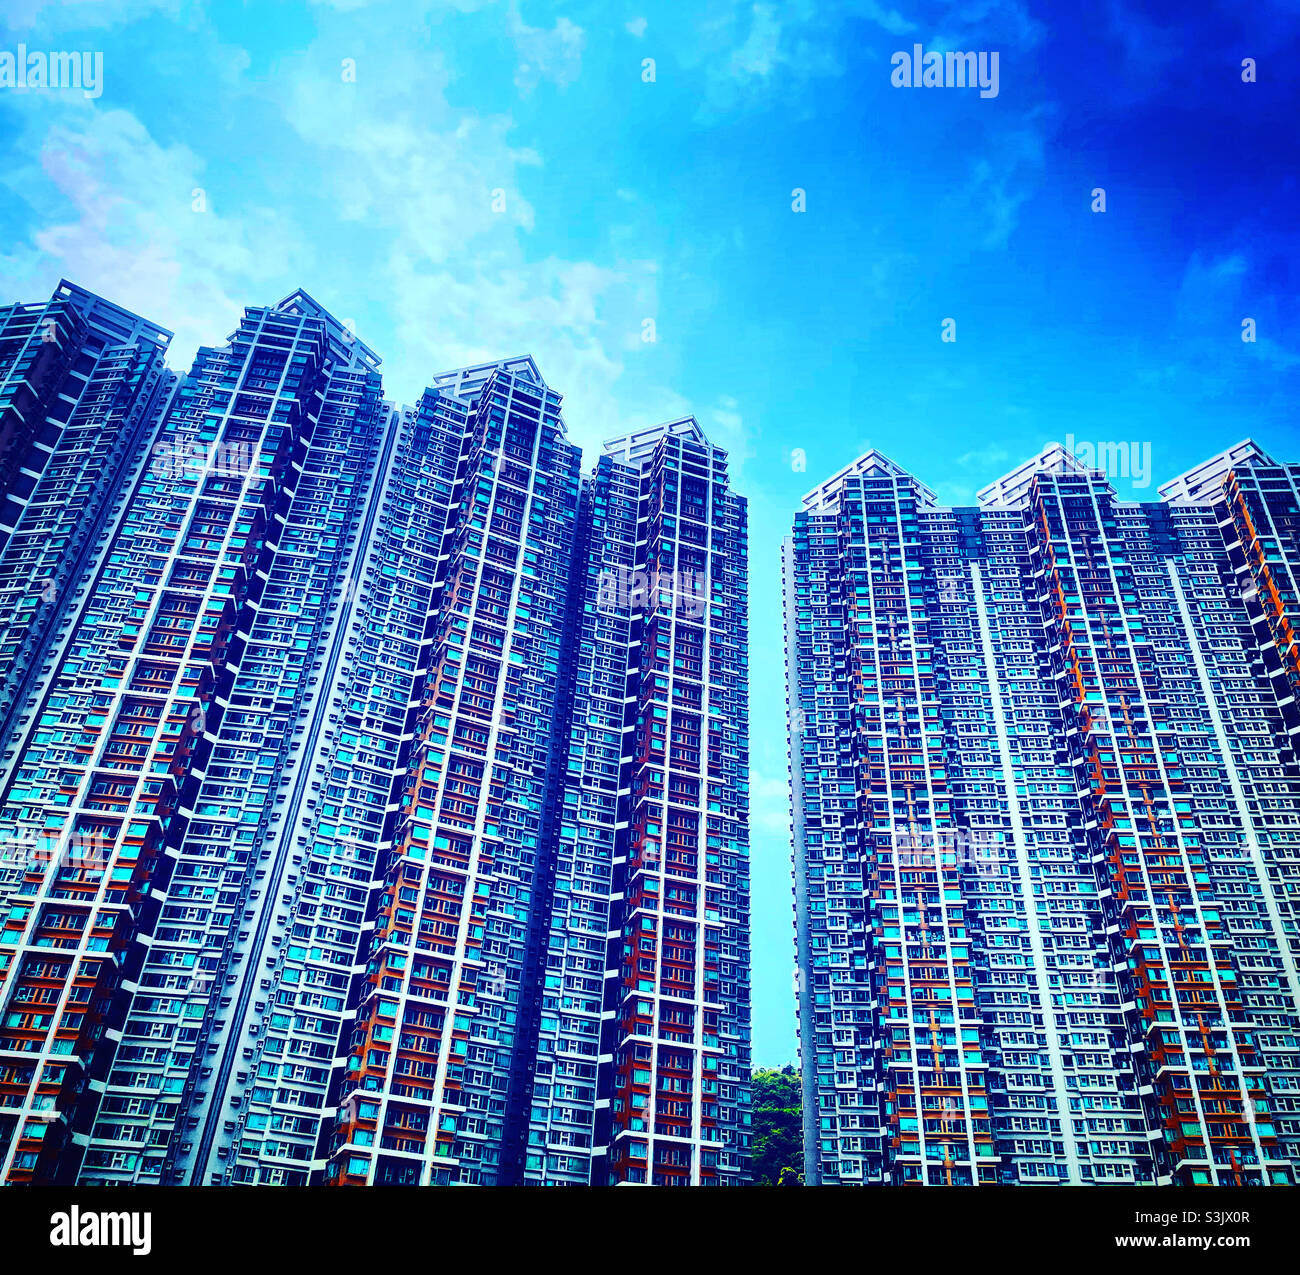 range of towers buidings in a big city in asia Stock Photo